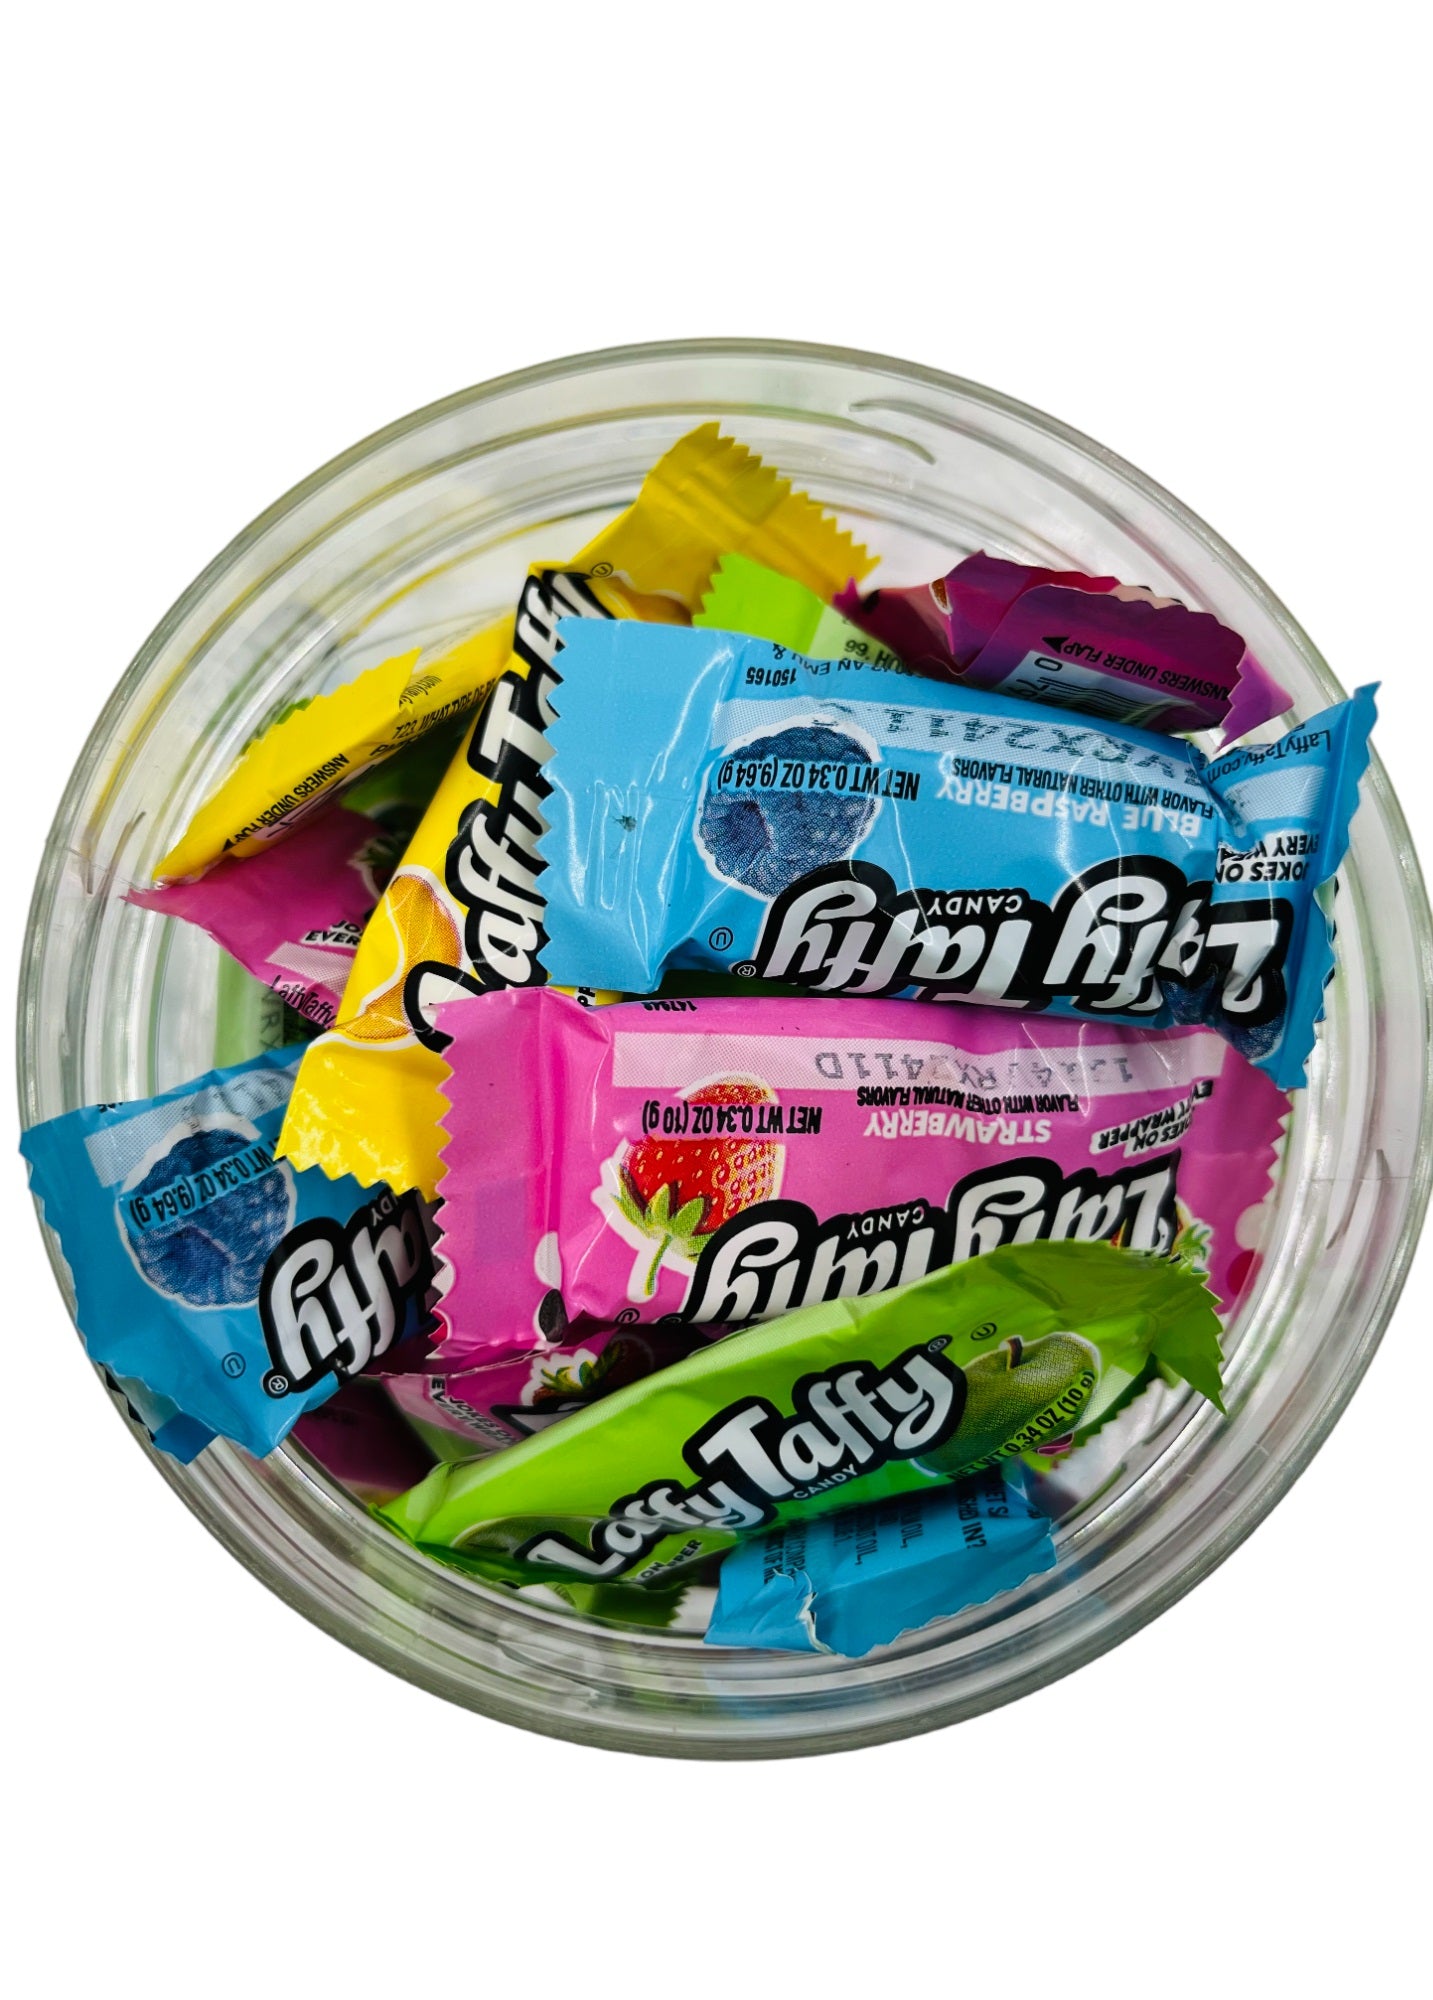 Simway Sweets Laffy Taffy Jar - Individually Wrapped American Sweets - Mixed Flavours 50 Pieces